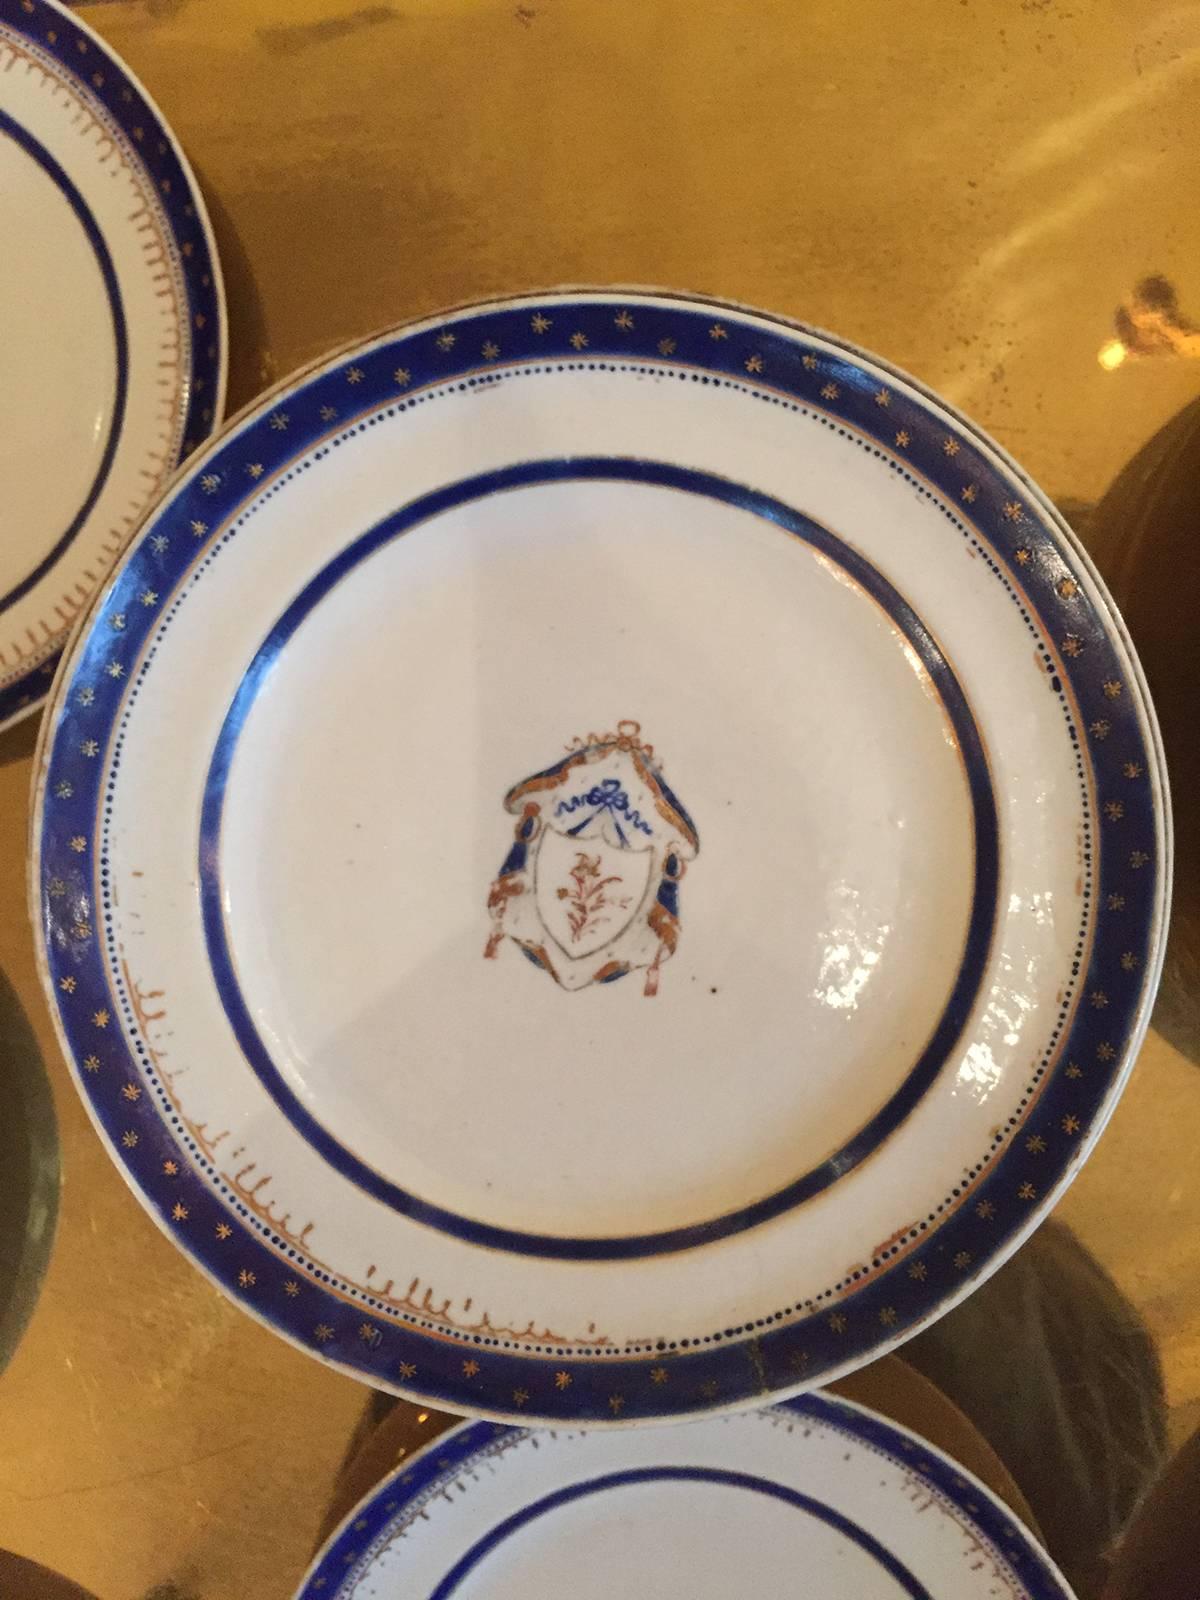 Porcelain Federal Period Set of Chinese Export Armorial Dishes, circa 1796-1820